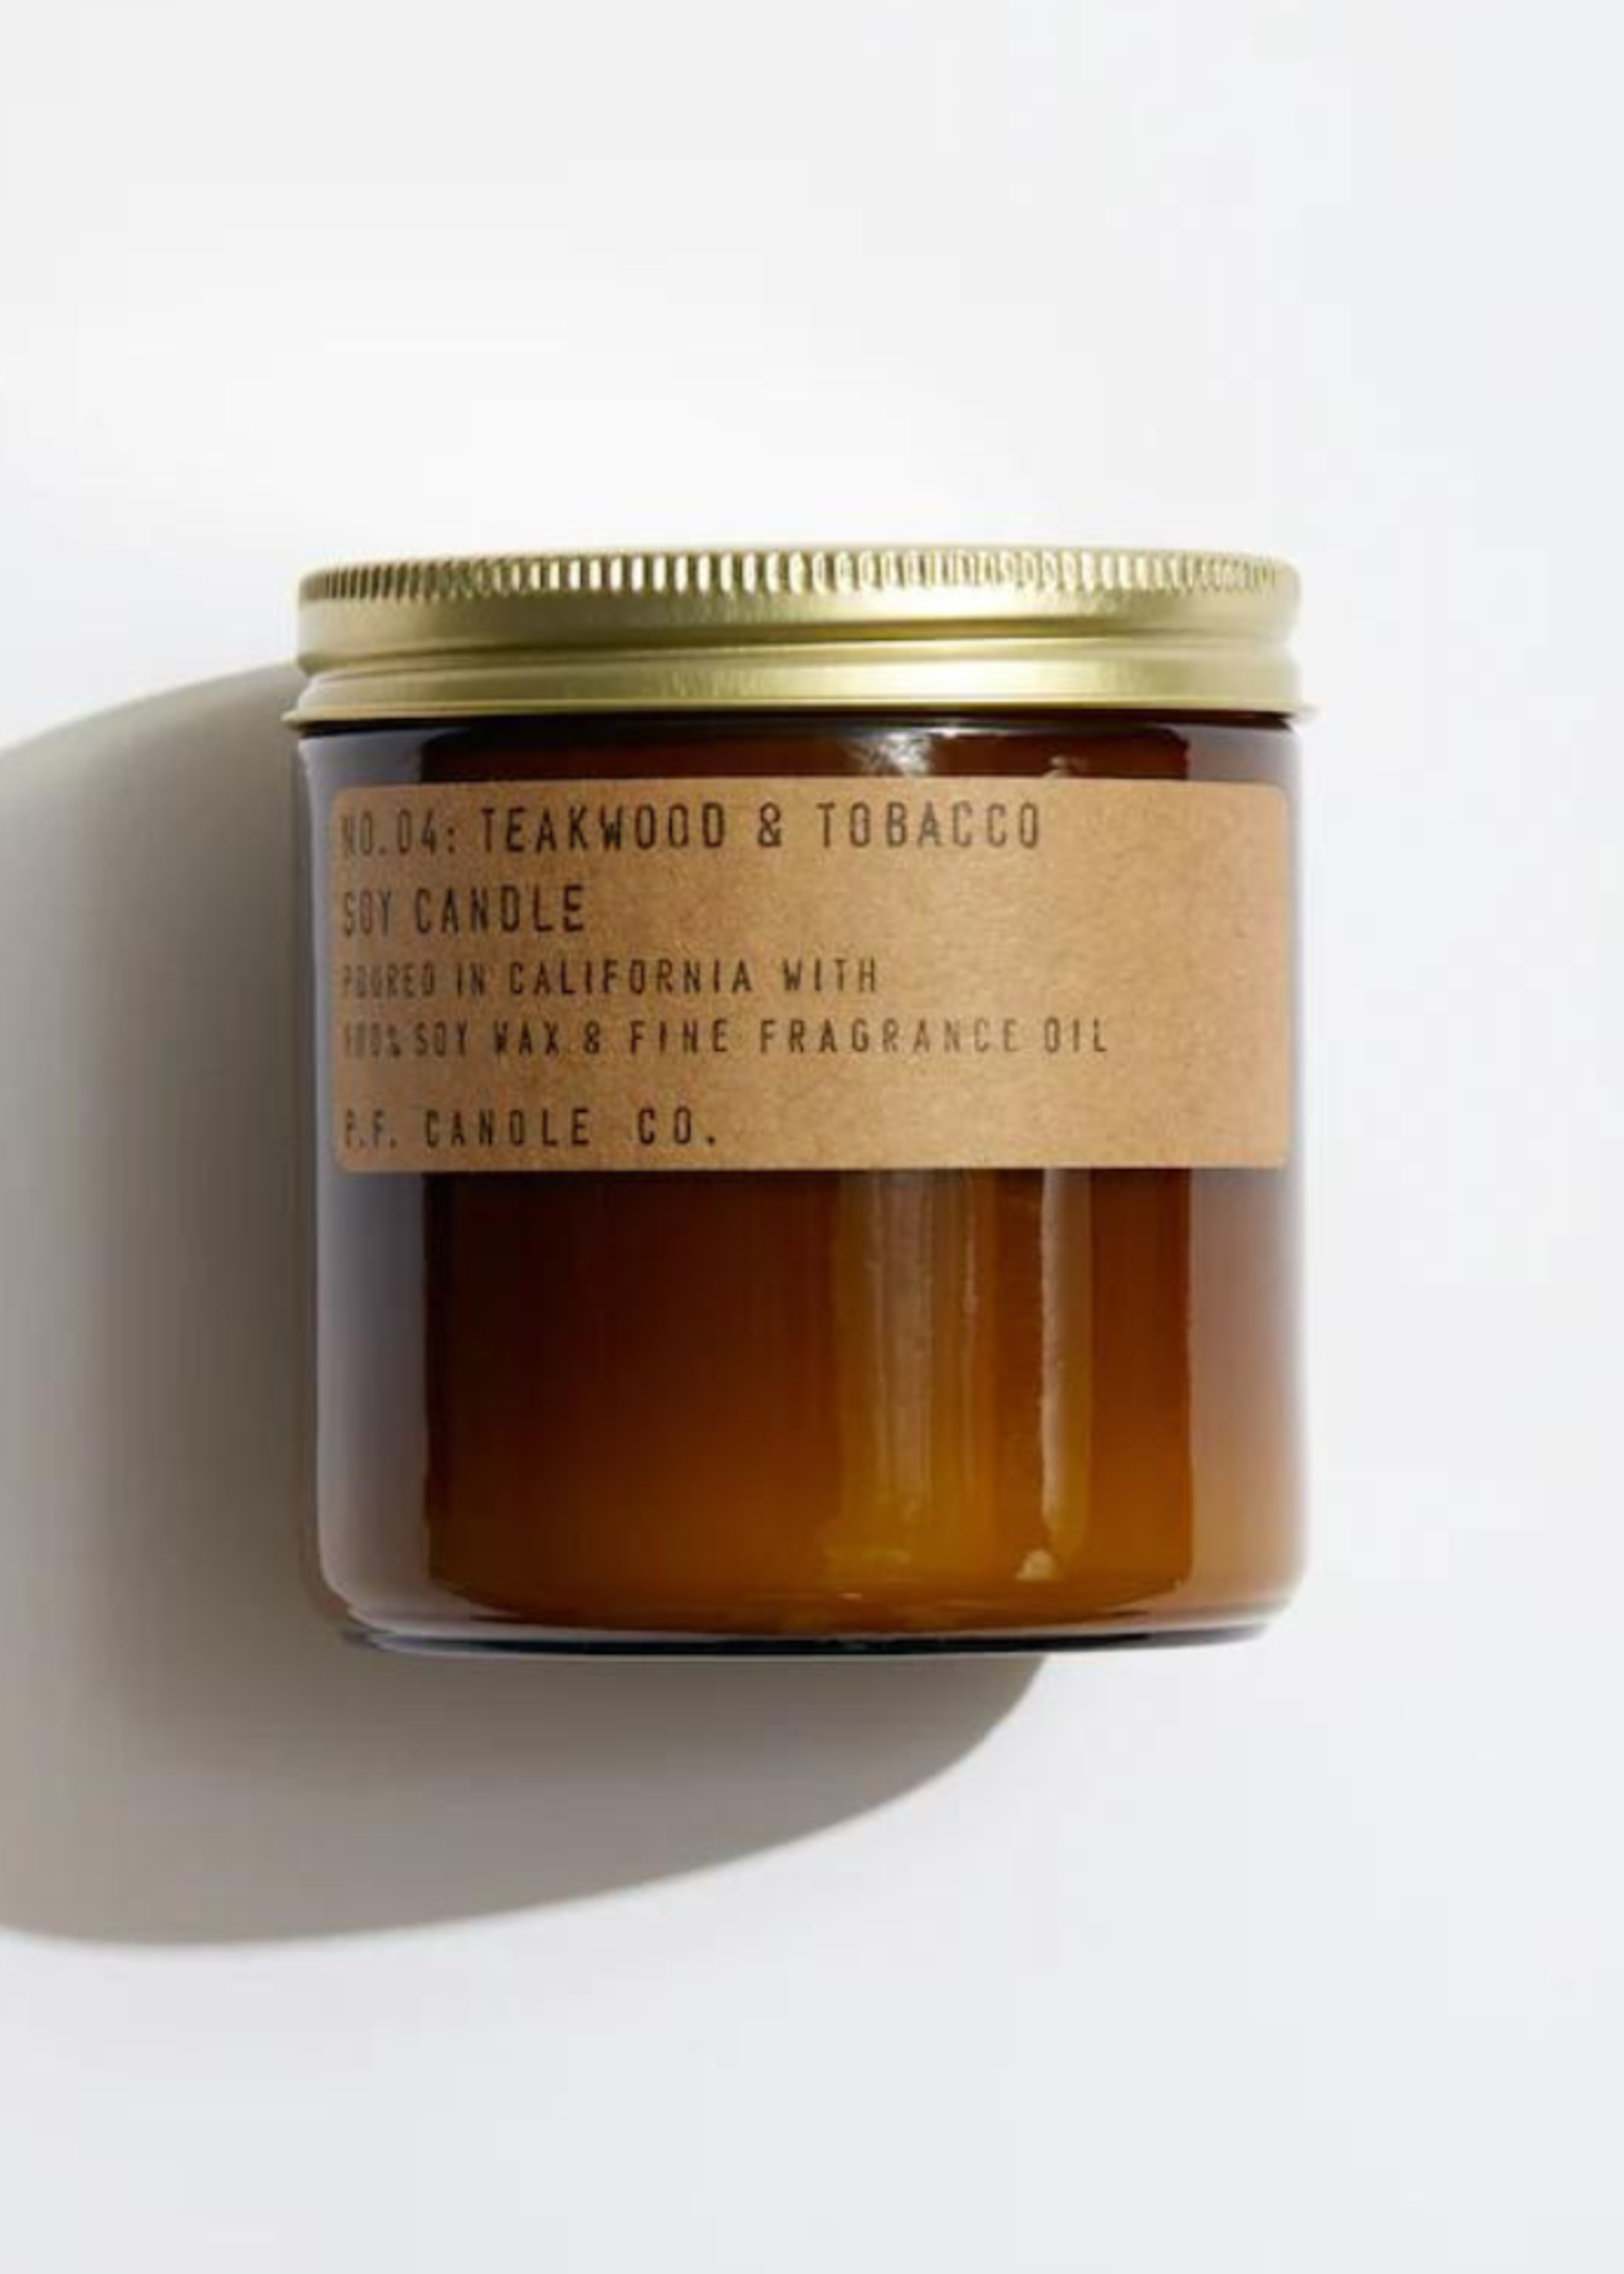 P.F. CANDLE CO. NO. 04 Teakwood and Tobacco Soy Candle